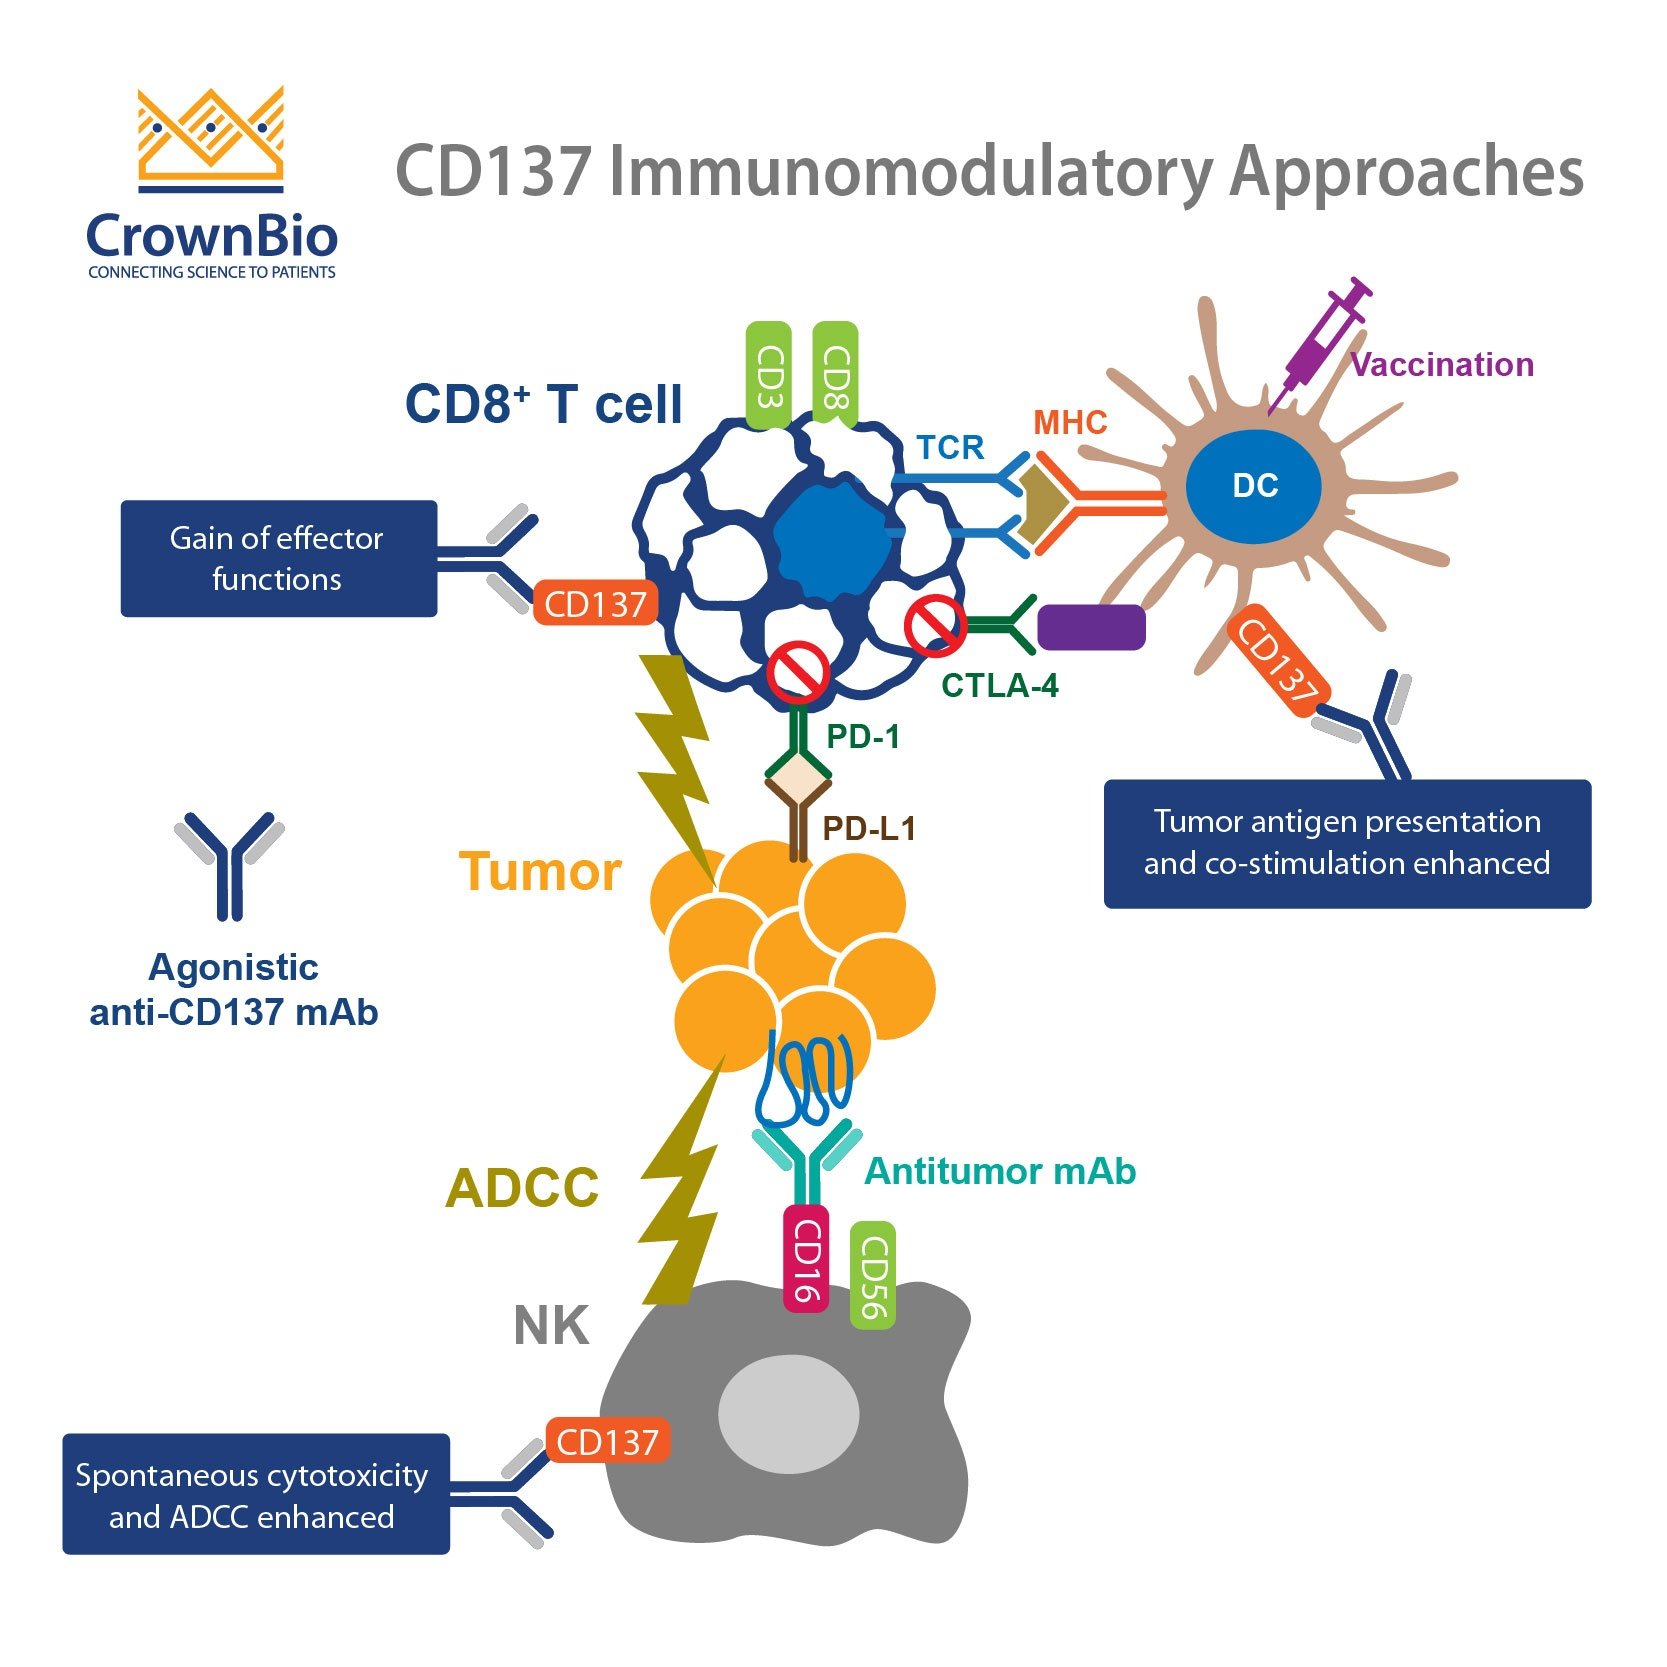 CD137: An Important Target in T Cell Co-Stimulation